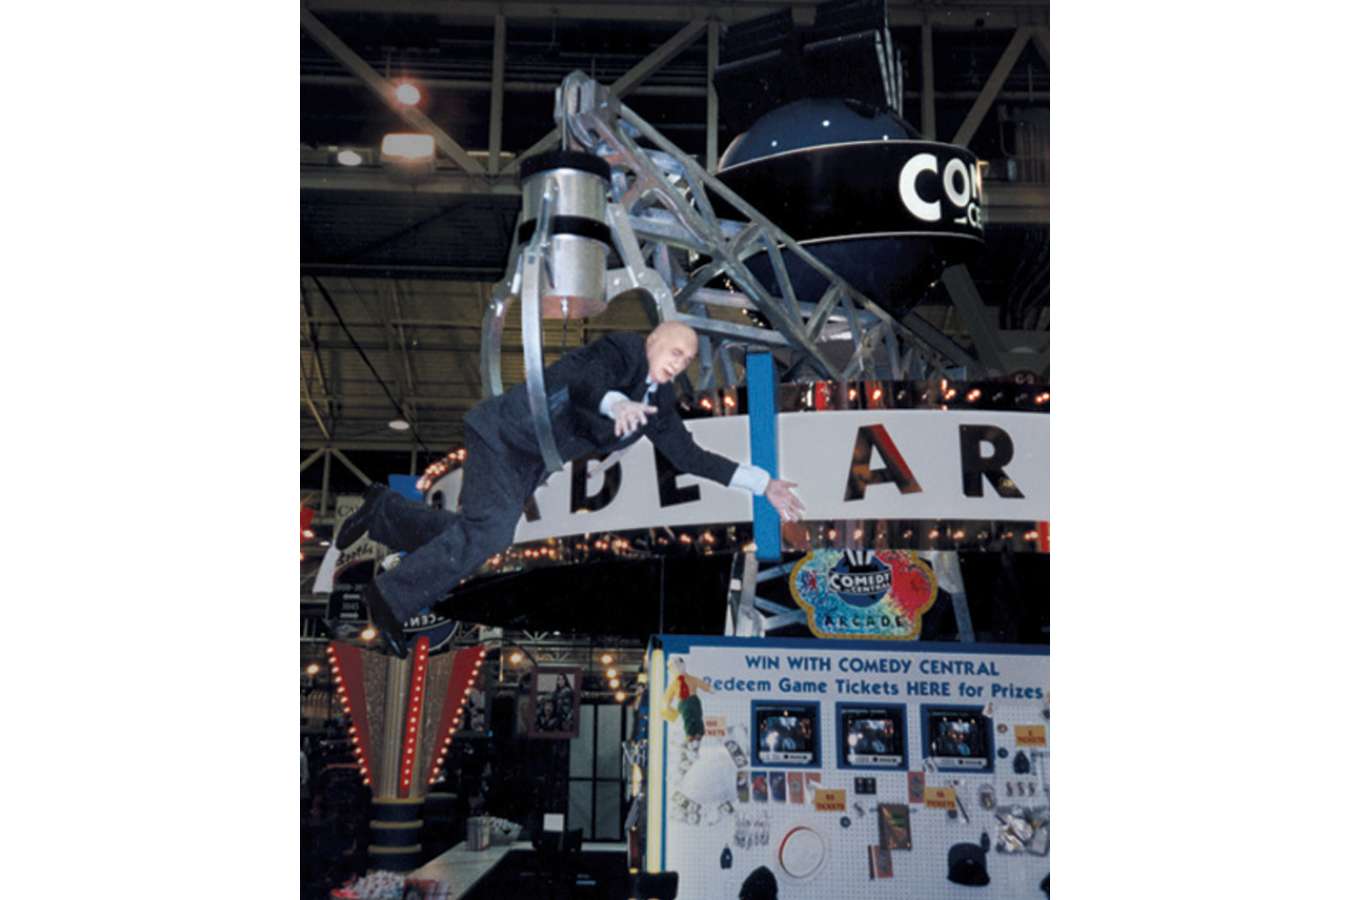 ccentral1 : "Grab-A-Guest" animatronic "pulled off the floor" with toilet paper on his shoe.